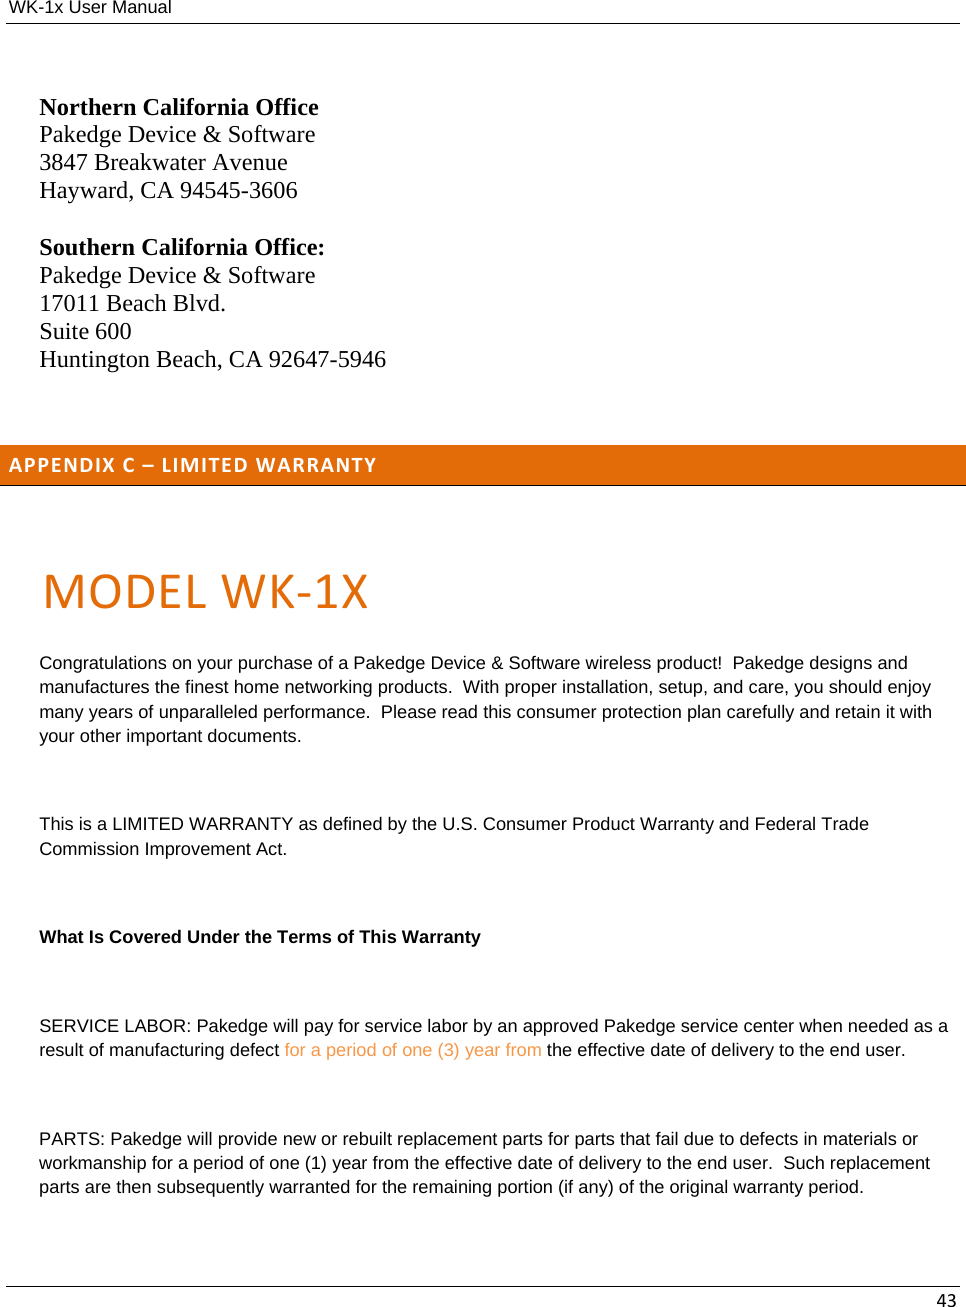 WK-1x User Manual 43Northern California Office Pakedge Device &amp; Software 3847 Breakwater Avenue Hayward, CA 94545-3606 Southern California Office: Pakedge Device &amp; Software 17011 Beach Blvd. Suite 600 Huntington Beach, CA 92647-5946  APPENDIXC–LIMITEDWARRANTYMODELWK‐1XCongratulations on your purchase of a Pakedge Device &amp; Software wireless product!  Pakedge designs and manufactures the finest home networking products.  With proper installation, setup, and care, you should enjoy many years of unparalleled performance.  Please read this consumer protection plan carefully and retain it with your other important documents.  This is a LIMITED WARRANTY as defined by the U.S. Consumer Product Warranty and Federal Trade Commission Improvement Act.  What Is Covered Under the Terms of This Warranty  SERVICE LABOR: Pakedge will pay for service labor by an approved Pakedge service center when needed as a result of manufacturing defect for a period of one (3) year from the effective date of delivery to the end user.  PARTS: Pakedge will provide new or rebuilt replacement parts for parts that fail due to defects in materials or workmanship for a period of one (1) year from the effective date of delivery to the end user.  Such replacement parts are then subsequently warranted for the remaining portion (if any) of the original warranty period.  